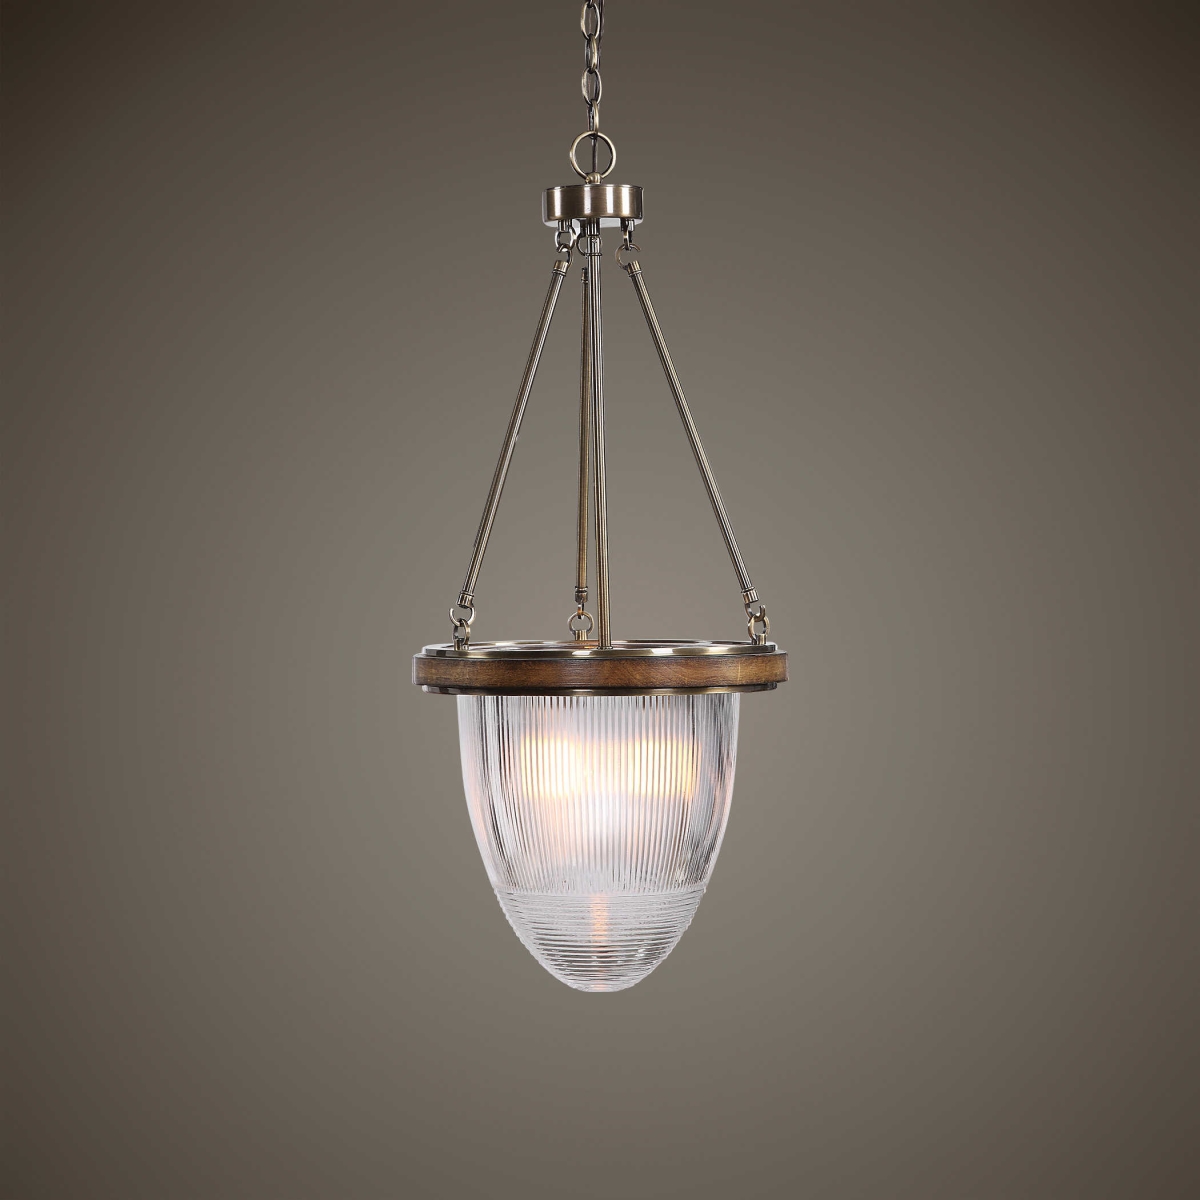 Picture of 212 Main 22154 Clemmie 1 Light Industrial Pendant